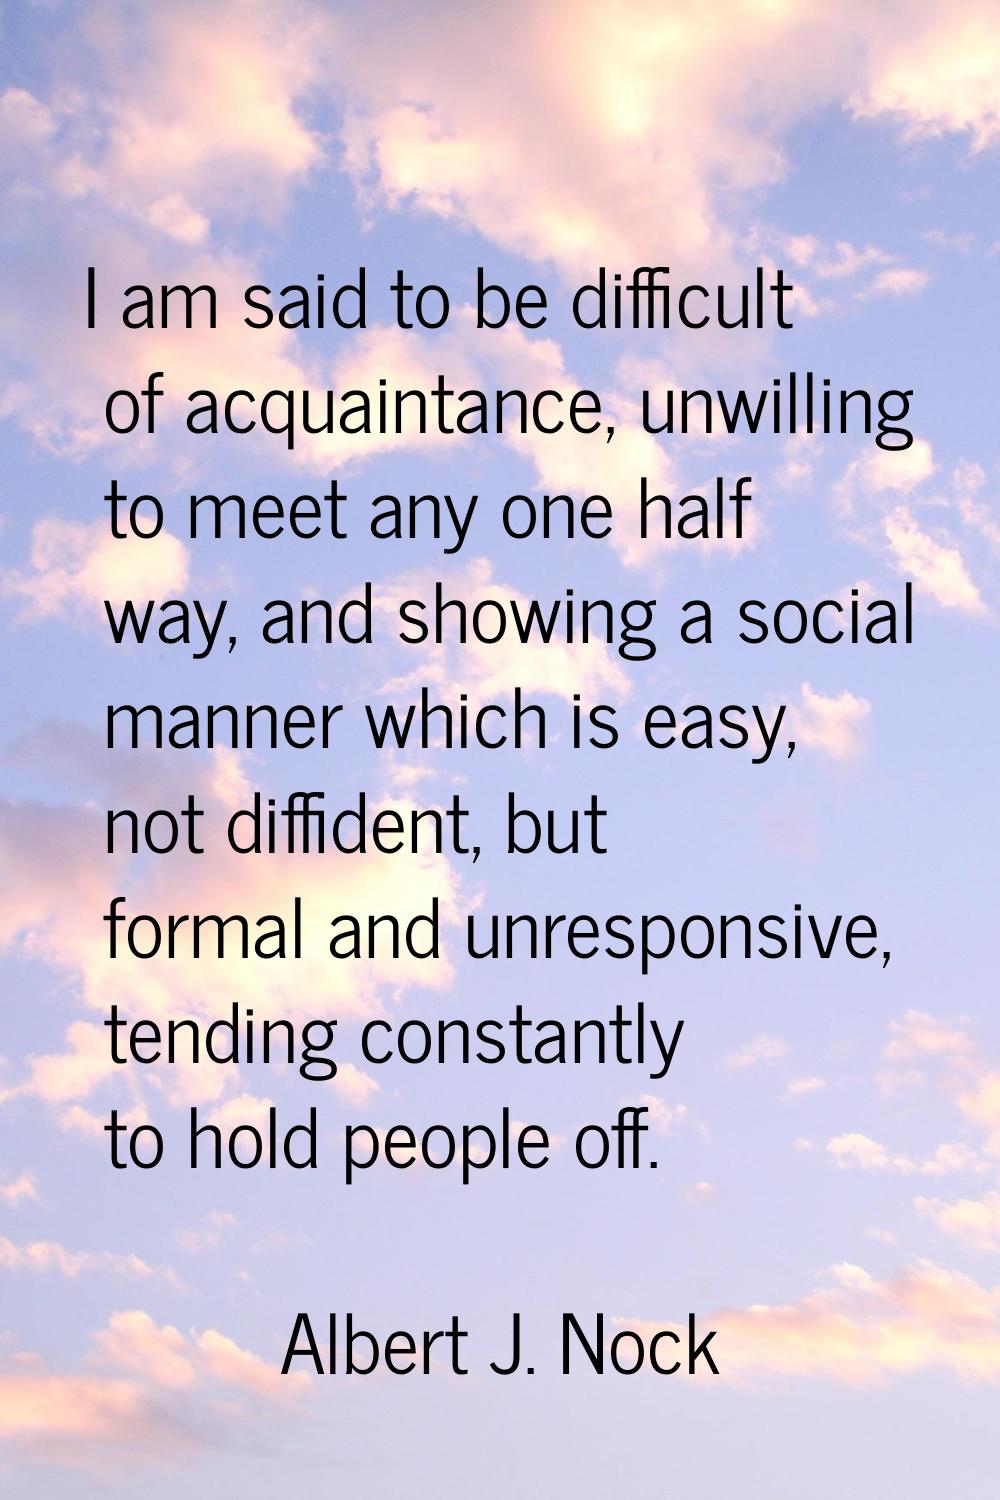 I am said to be difficult of acquaintance, unwilling to meet any one half way, and showing a social